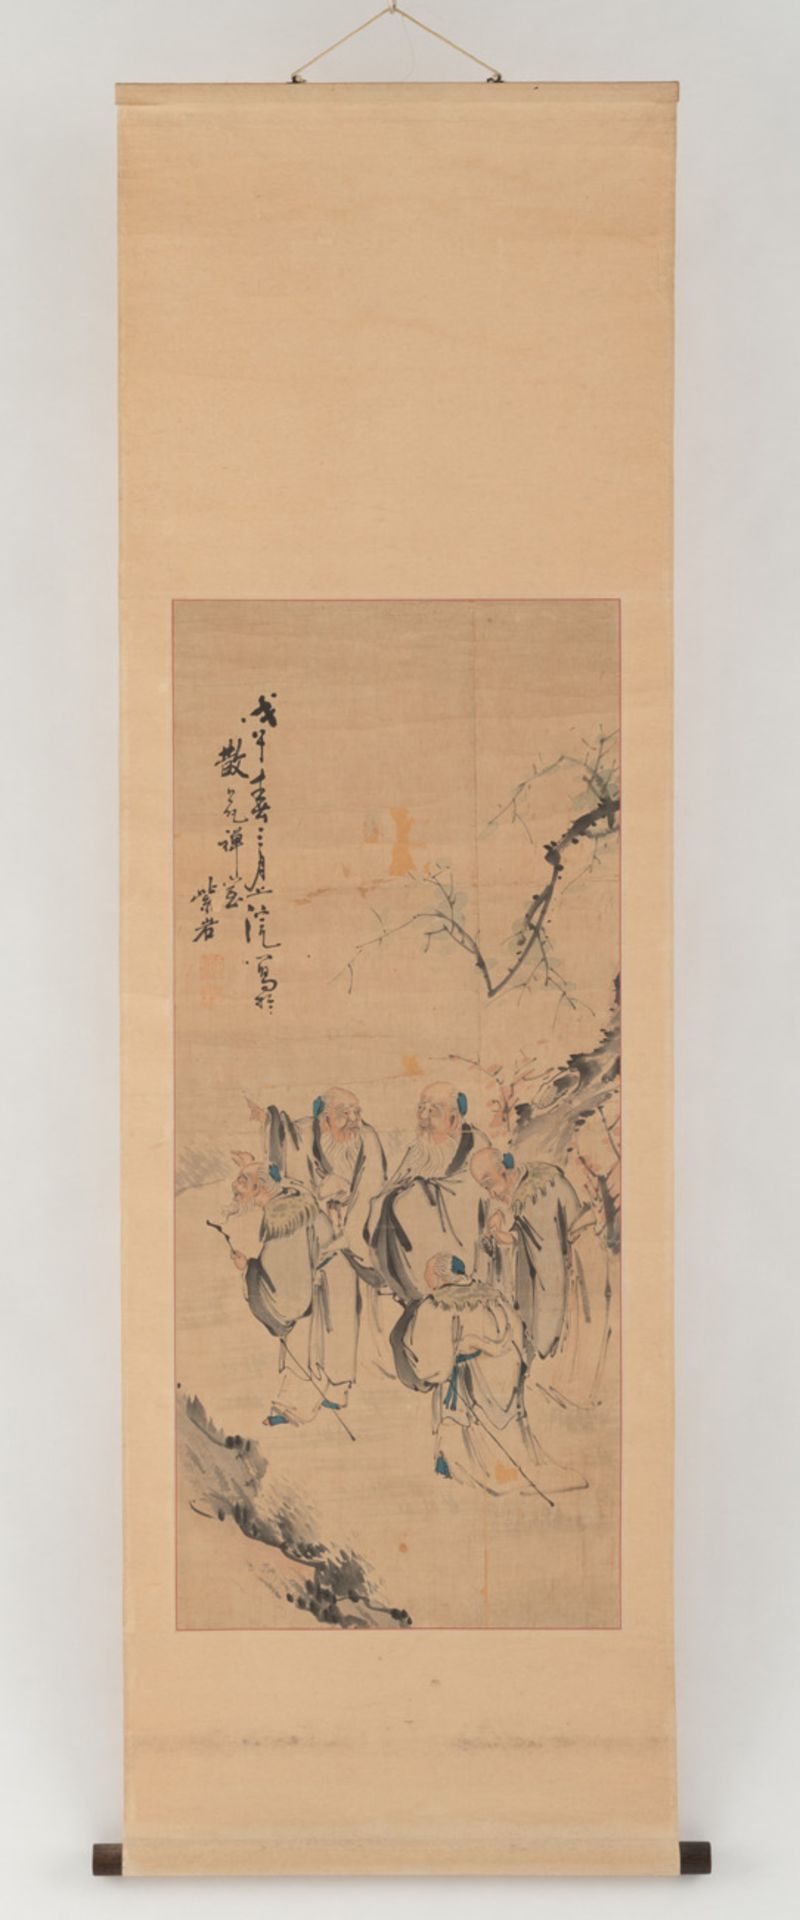 A PAIR OF HANGING SCROLLS WITH NOVEL SCENES AND A HANGING SCROLL DEPICTING THE MEETING OF FIVE SCHO - Image 2 of 5